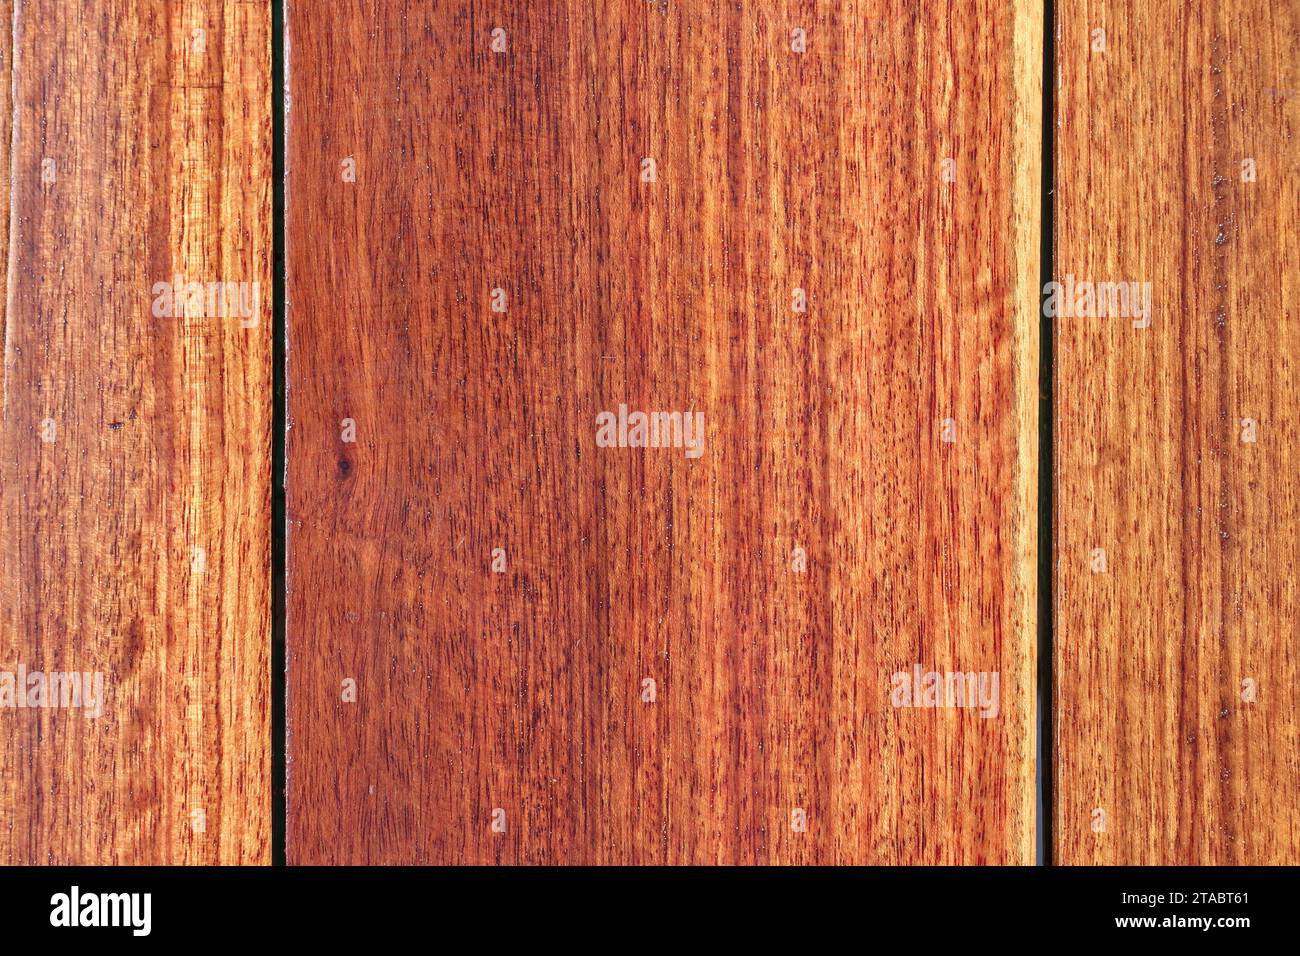 Top view of a varnished plank floor and seeing the connections of the boards. Stock Photo